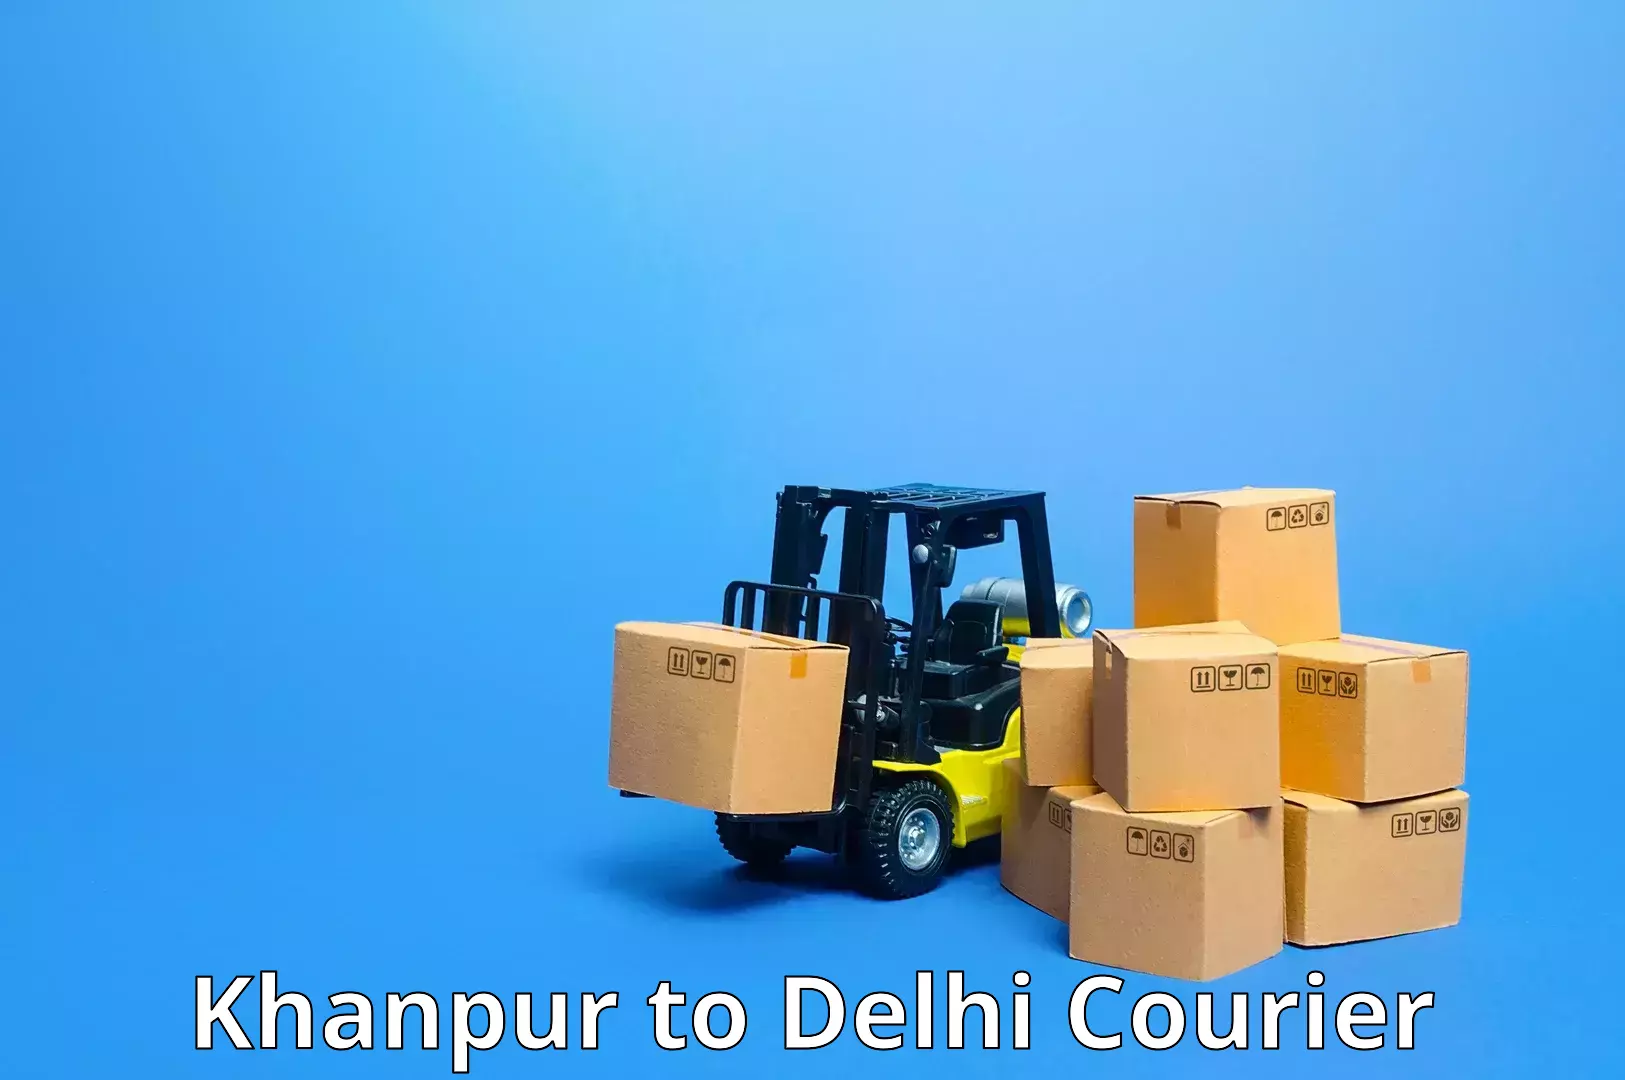 Enhanced shipping experience Khanpur to NCR